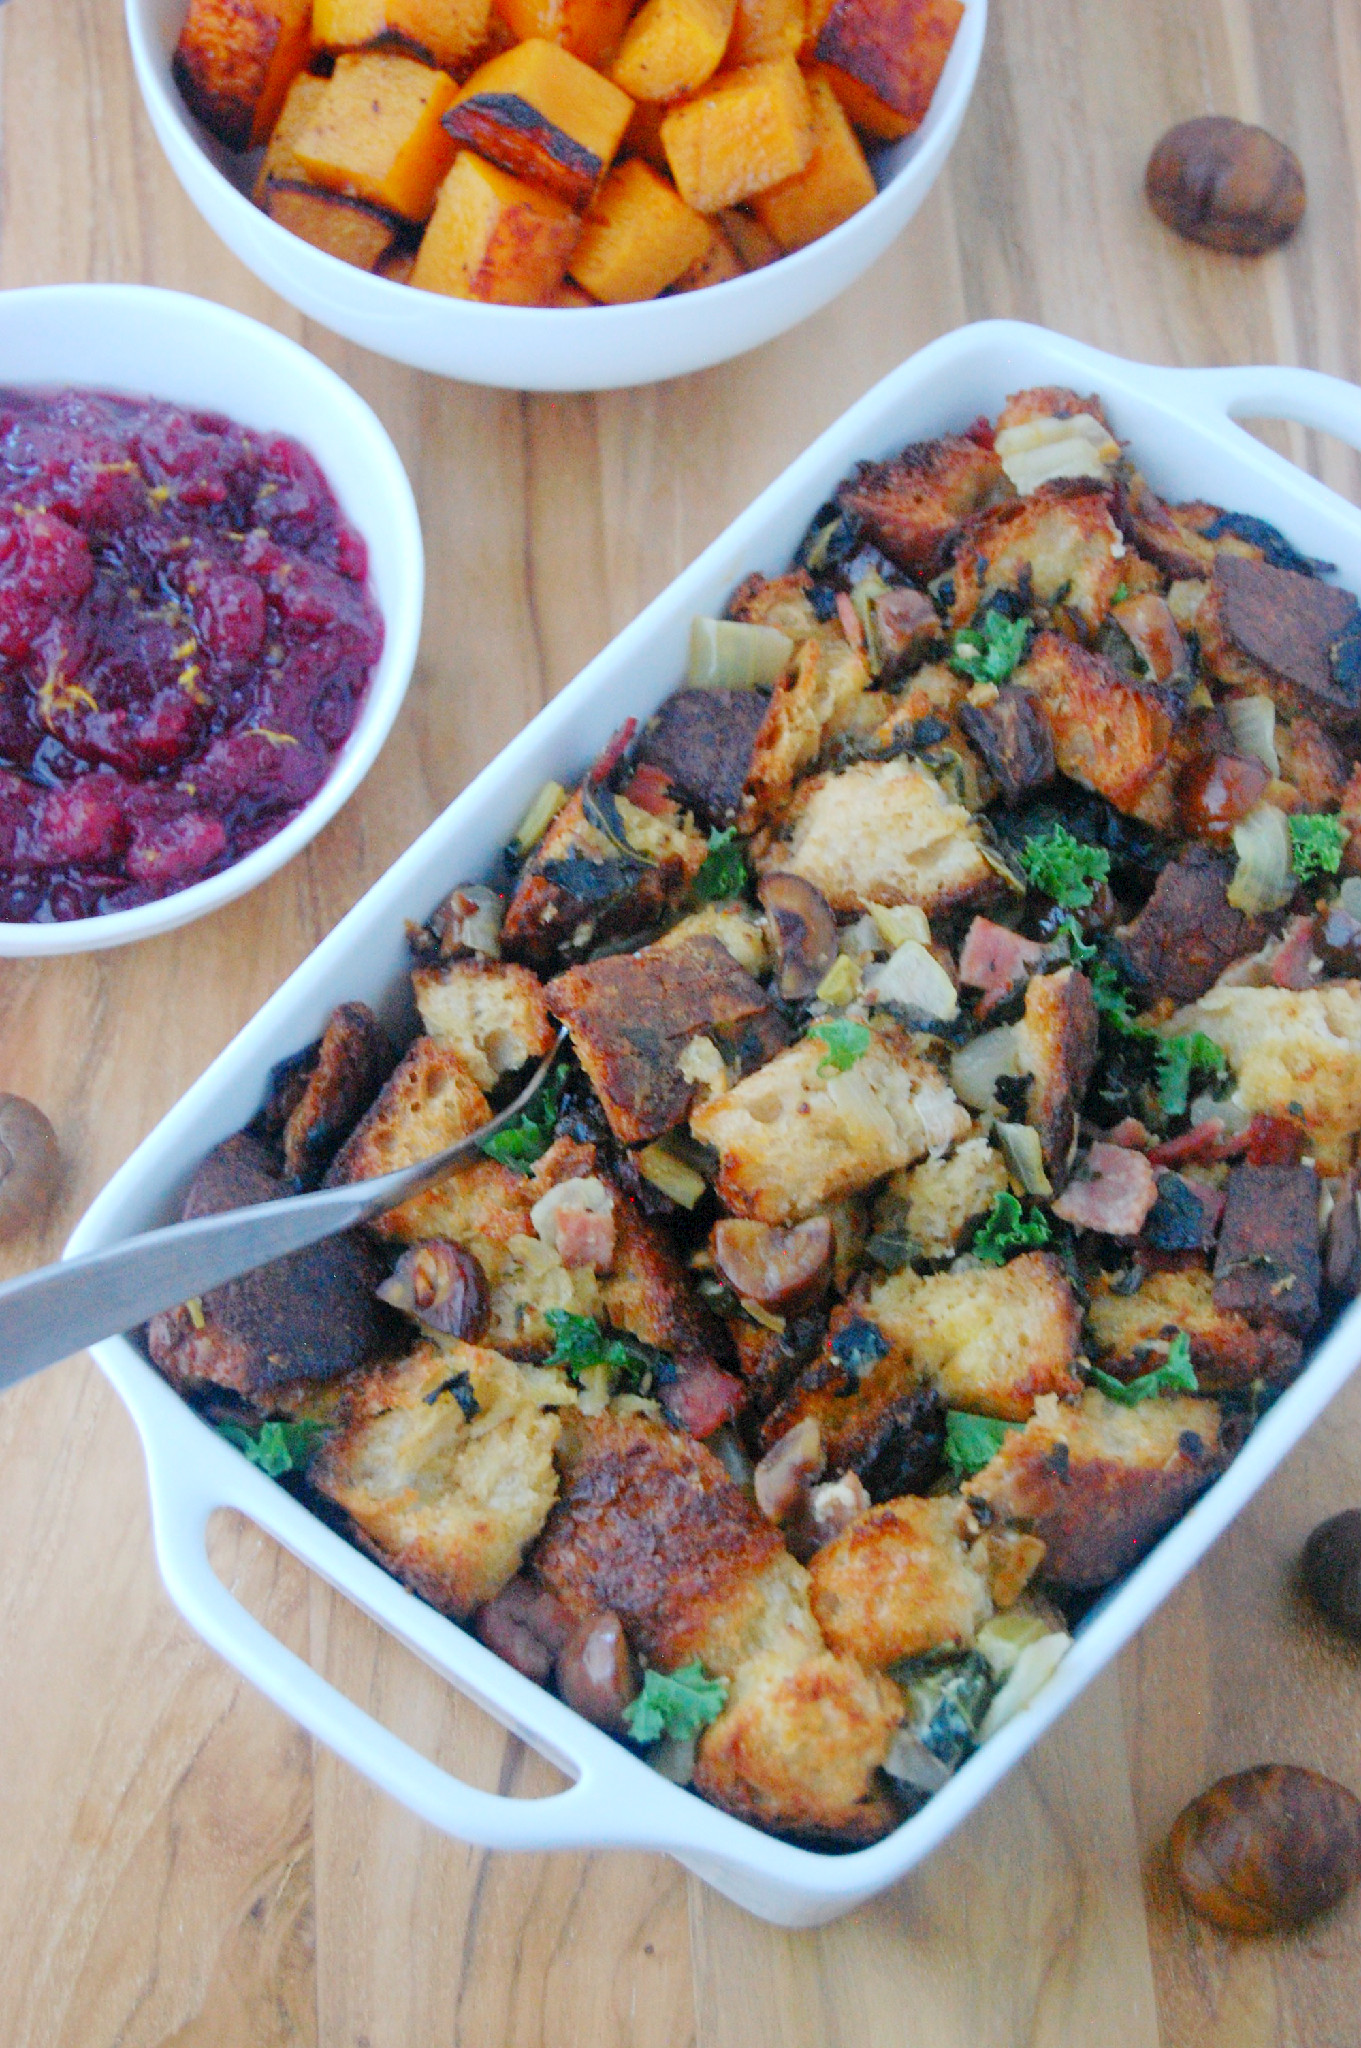 Chestnut Stuffing Recipe (With Step by Step)